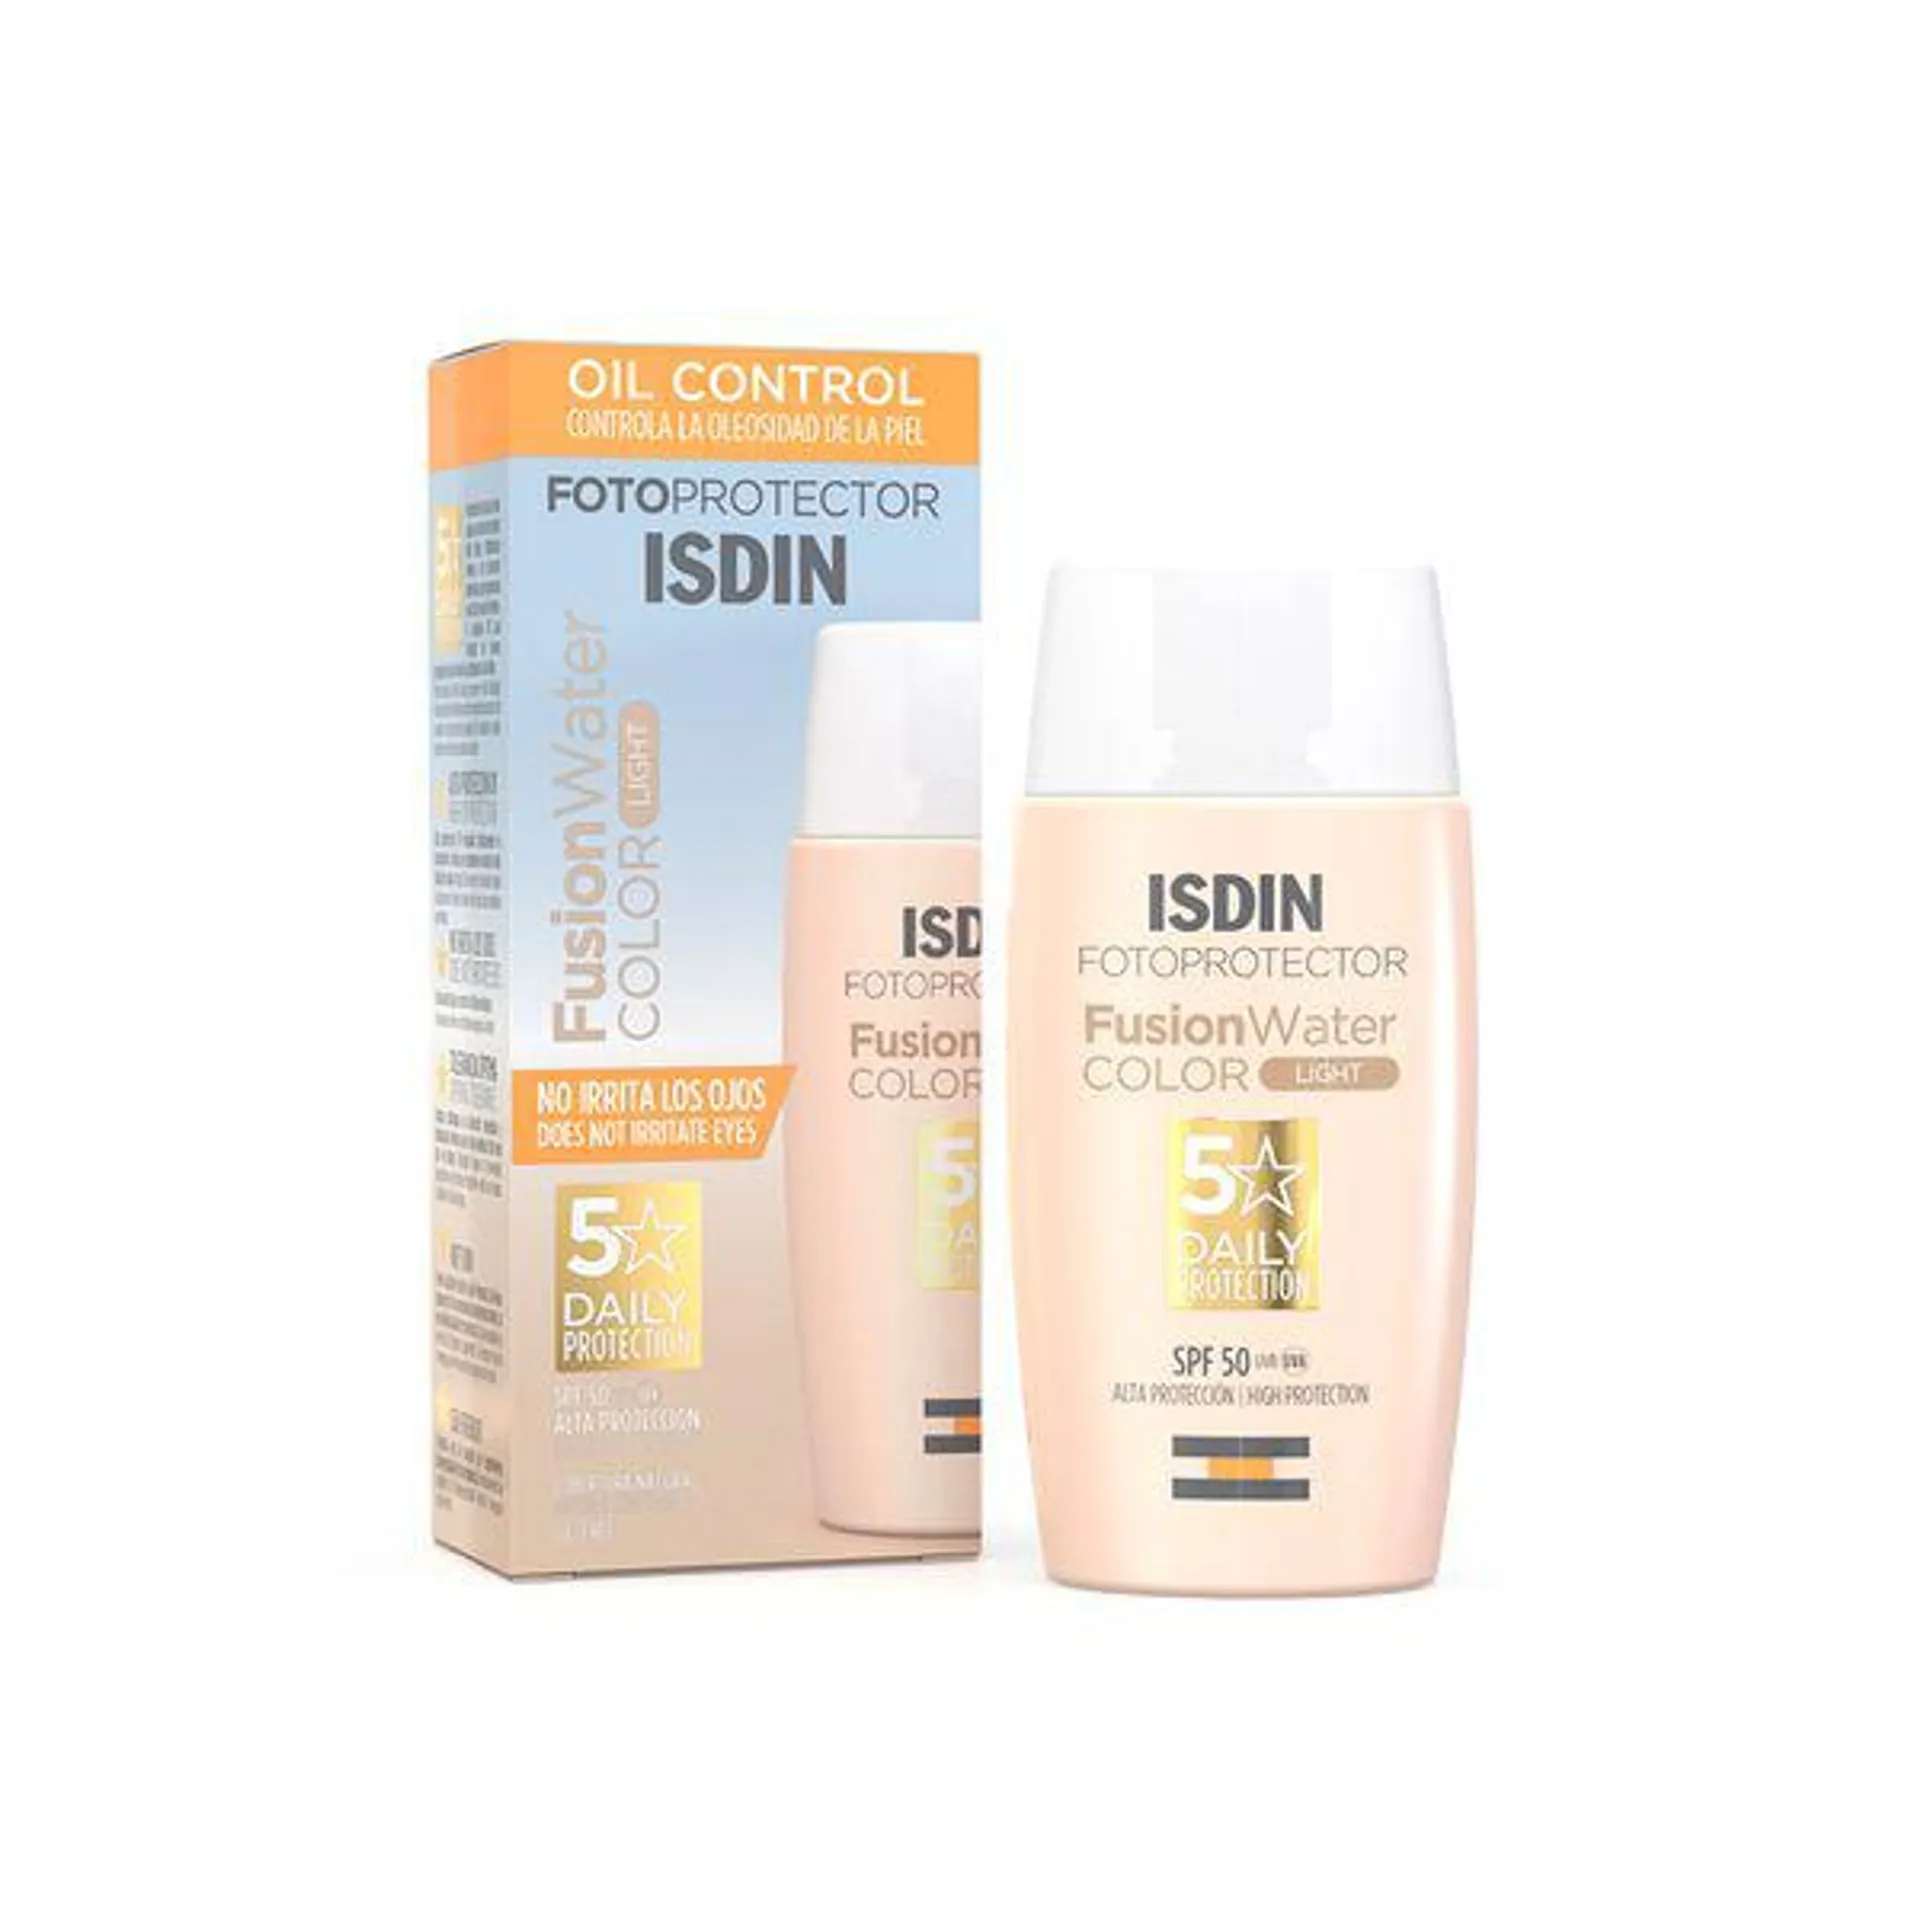 Fotoprotector Isdin Fusion Water Color Light SPF50+ x 50 ml